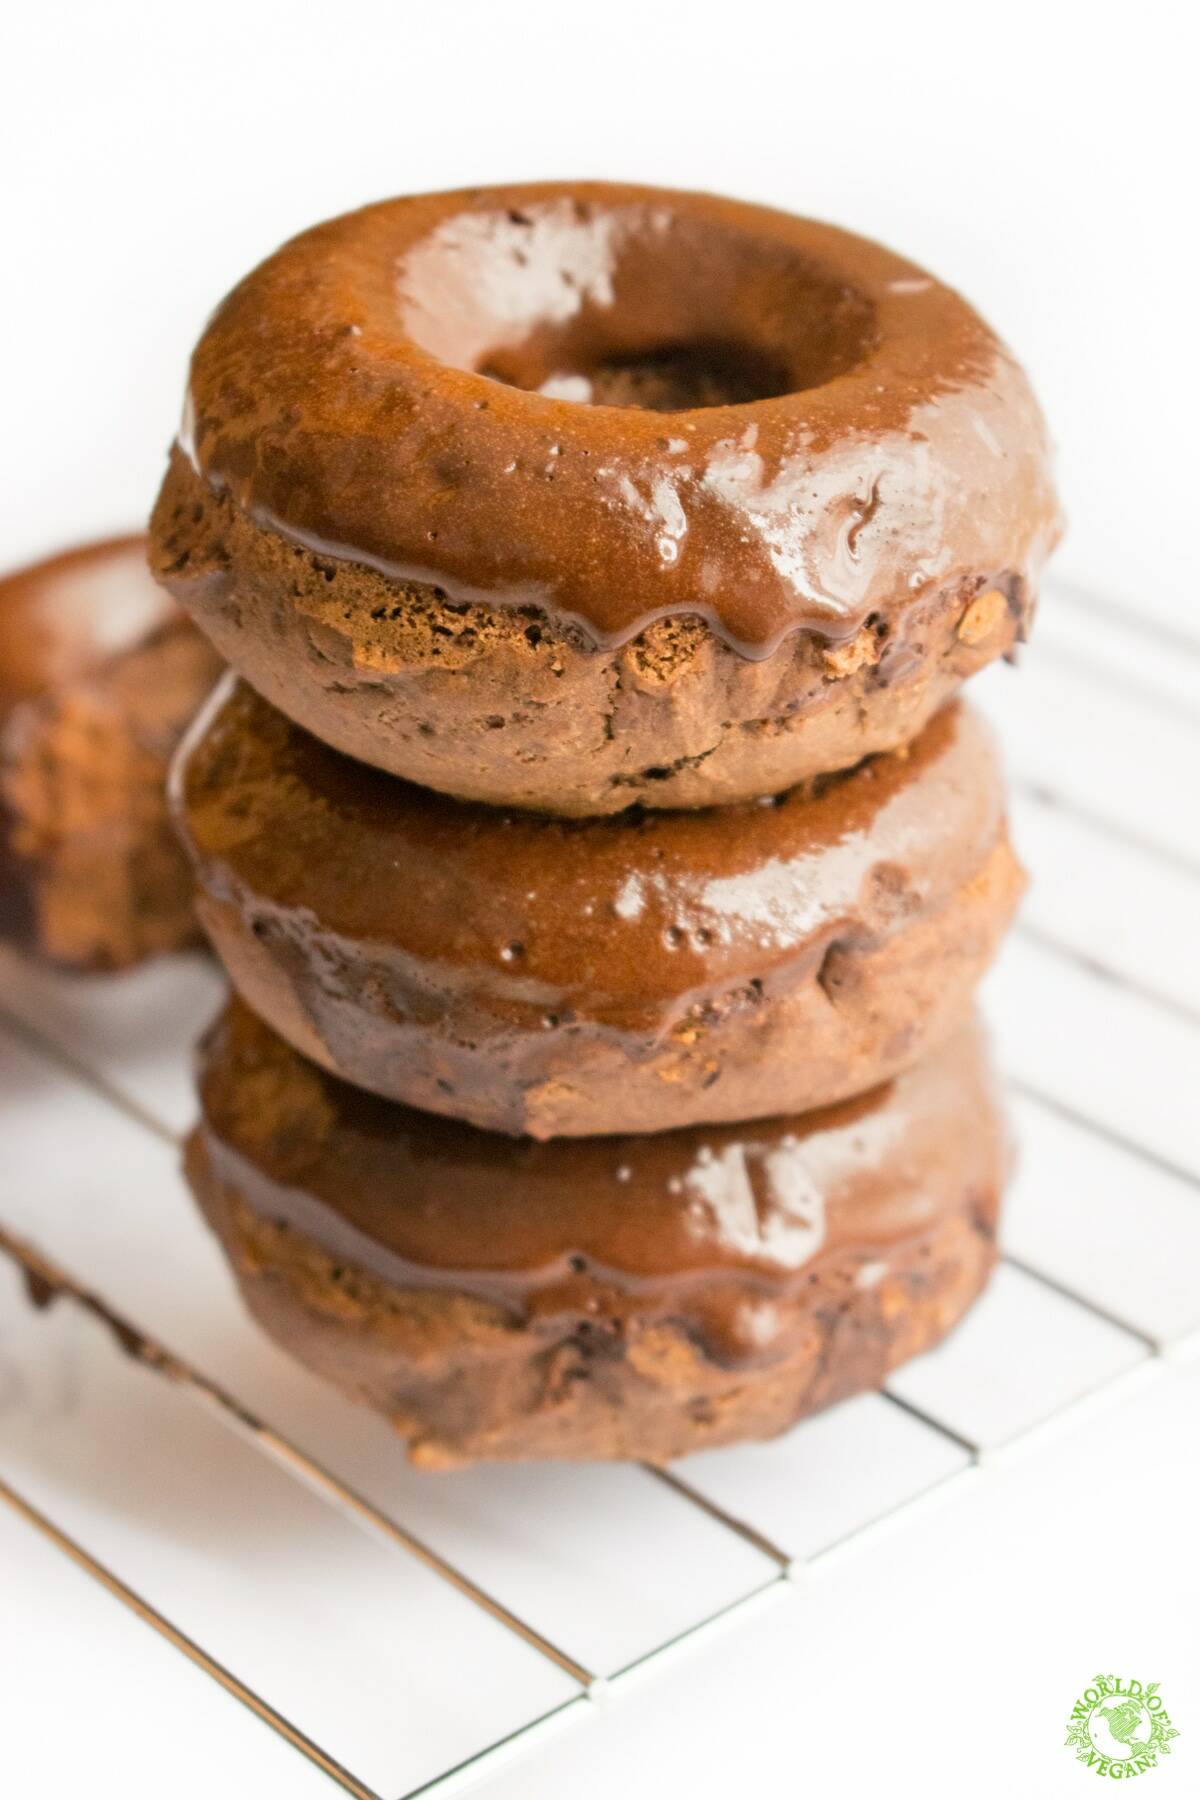 Double Chocolate —Vegan Style! Baked Instead of Fried With A Decadent Glaze